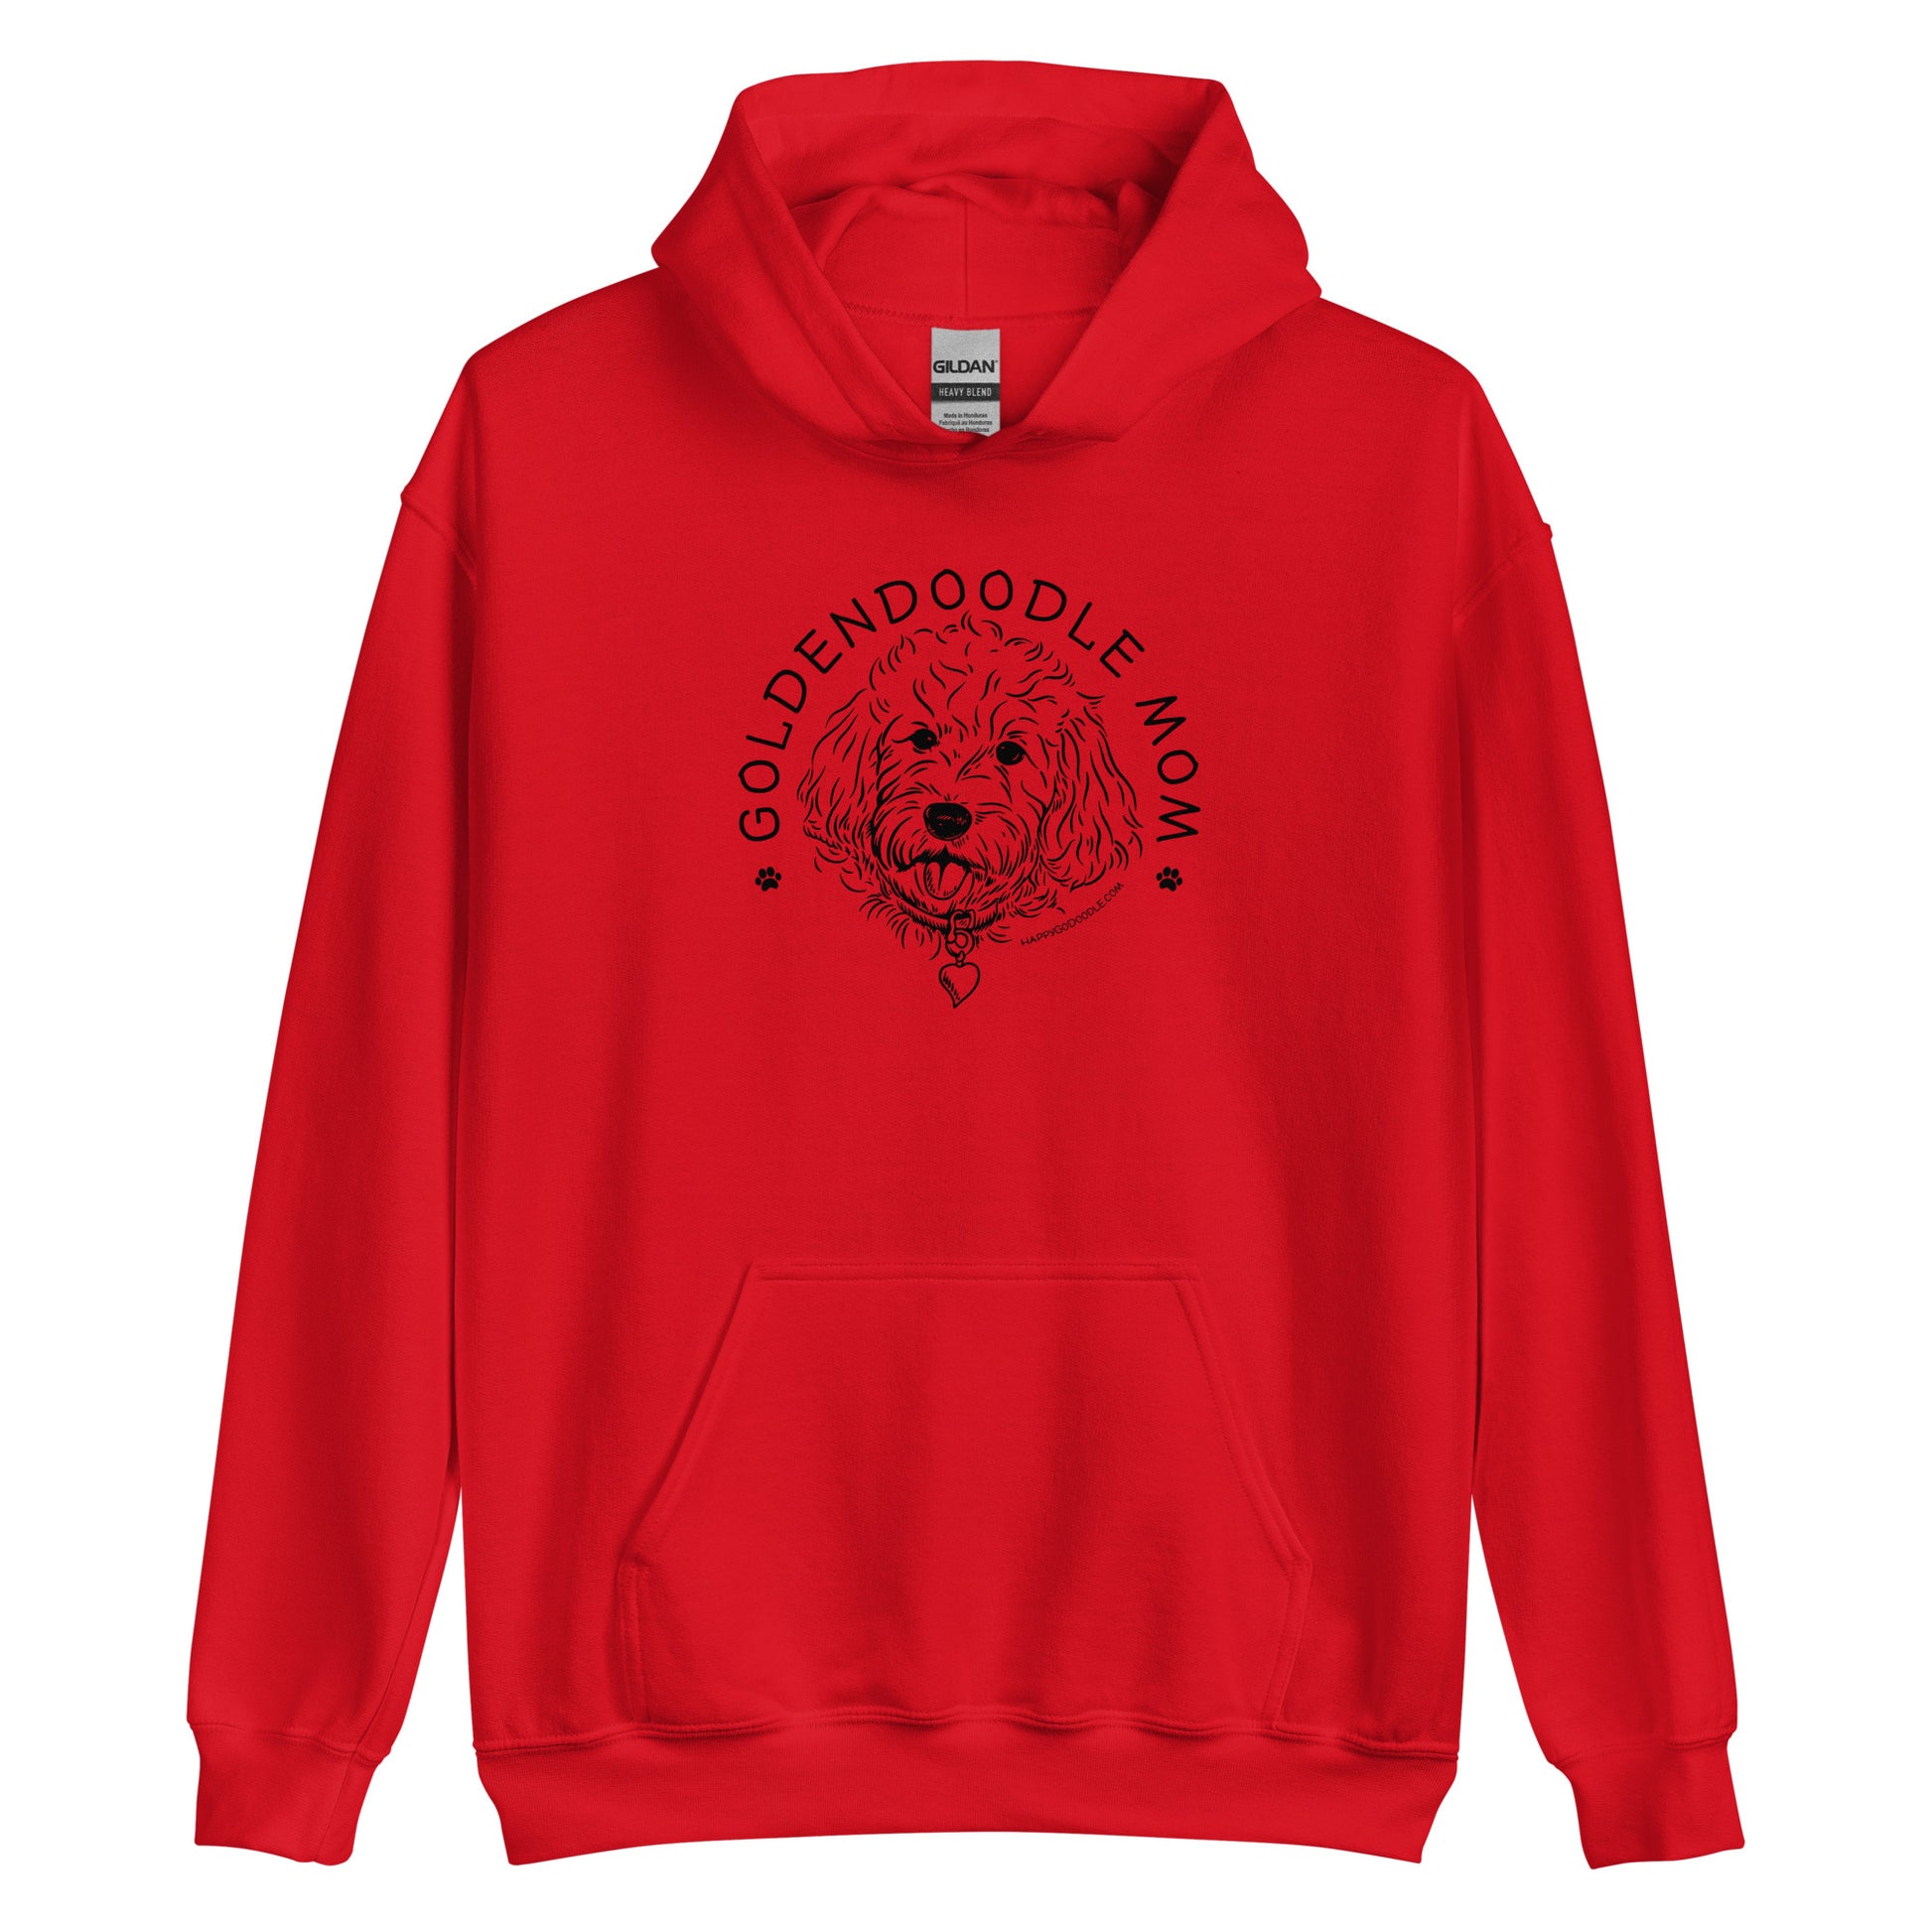 Goldendoodle hoodie with Goldendoodle face and words "Goldendoodle Mom" in red color